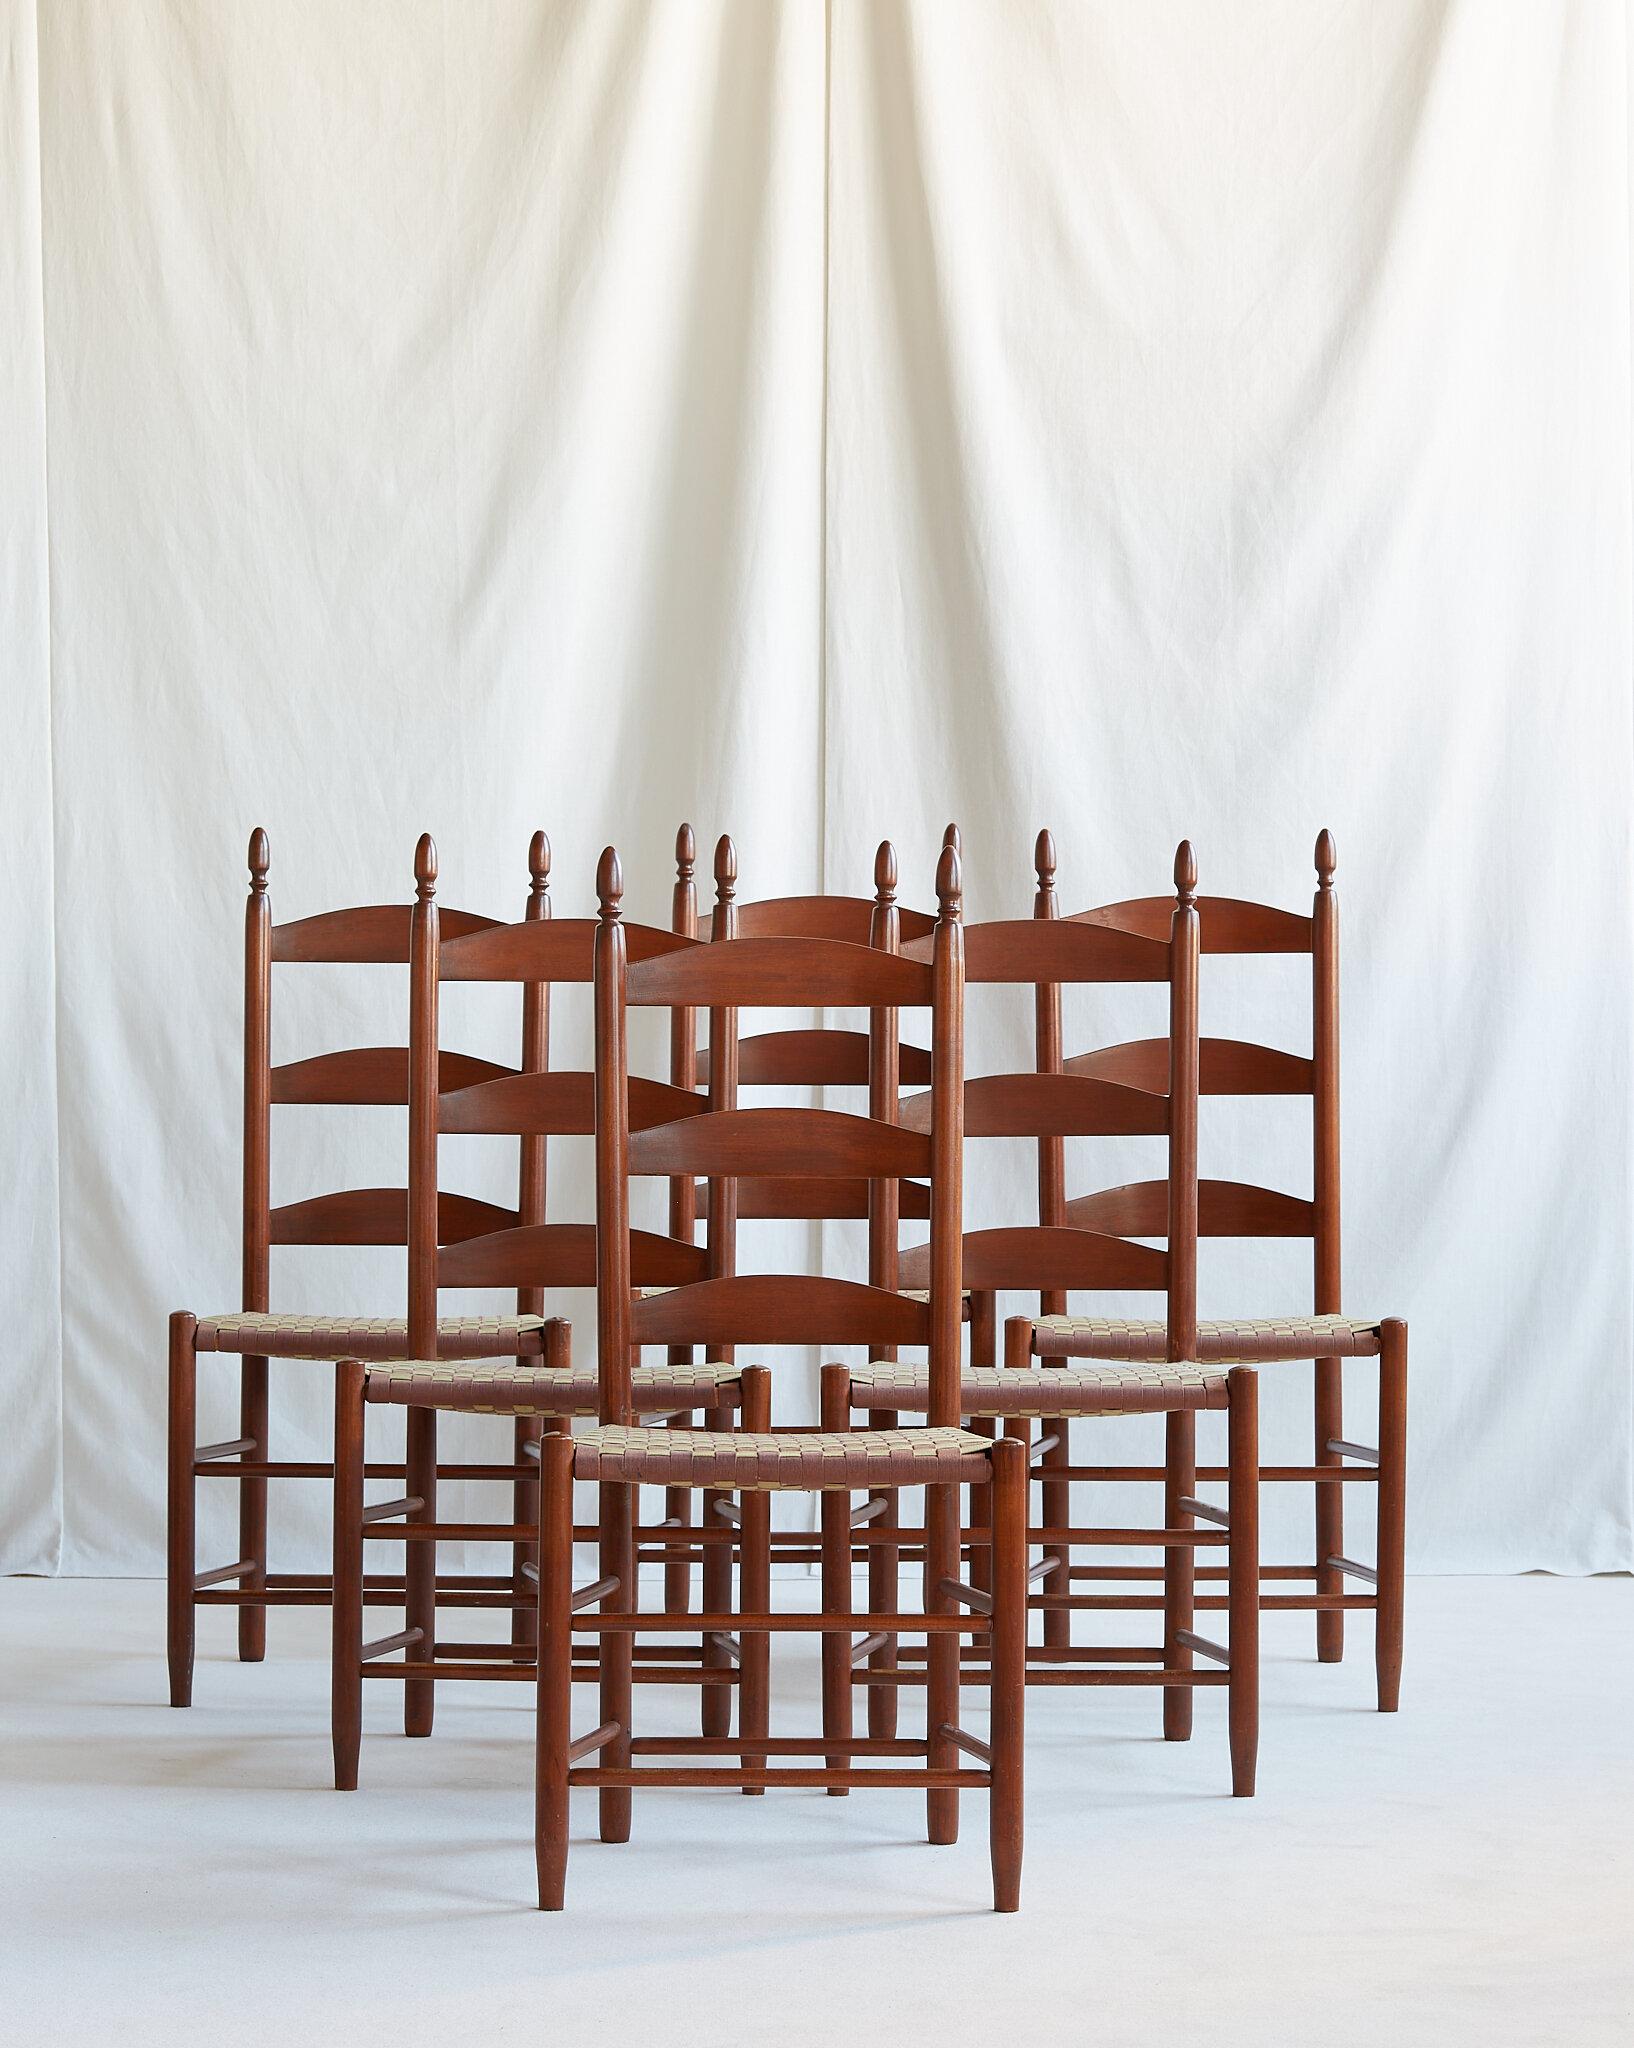 Historic Set of 6 Shaker Dining Chairs, Mount Lebanon c 1935 For Sale 2